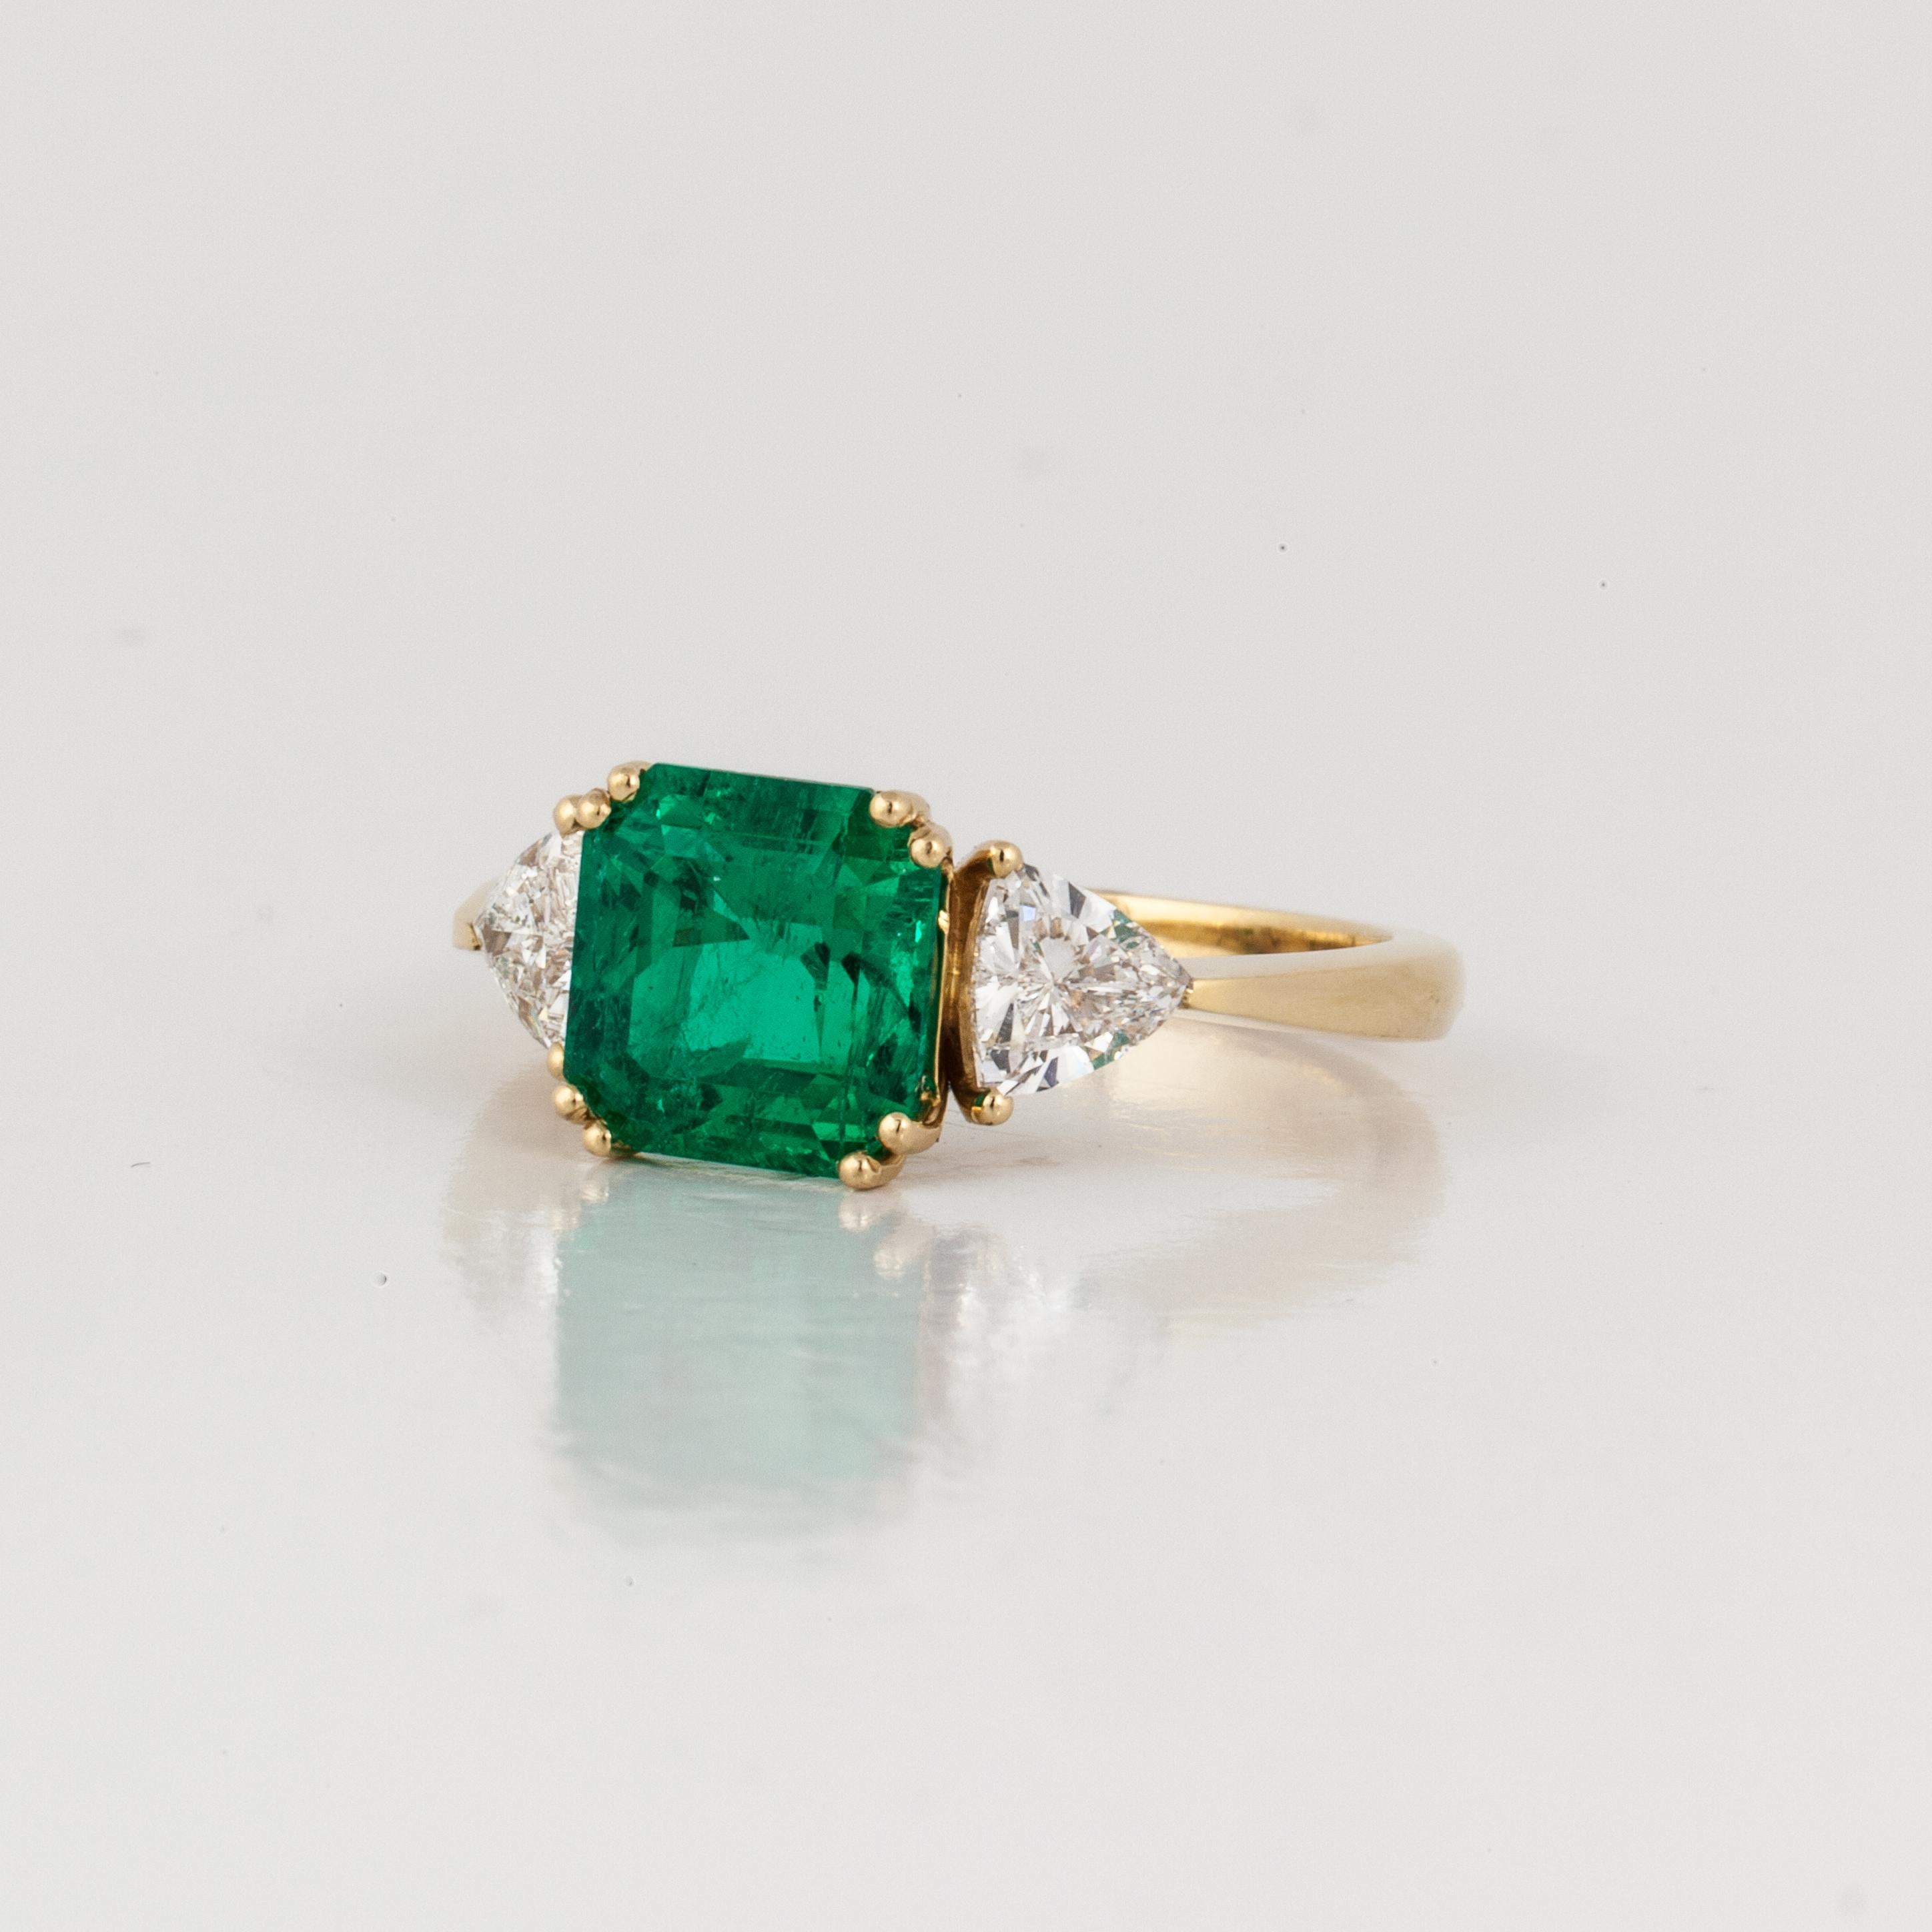 18K yellow gold ring featuring an AGL certified emerald accented with diamonds. The 2.30 carat emerald-cut emerald is accompanied by an AGL report stating, Columbian/minor.  Additionally, there are 2 triangular-cut diamonds that total 0.80 carats;